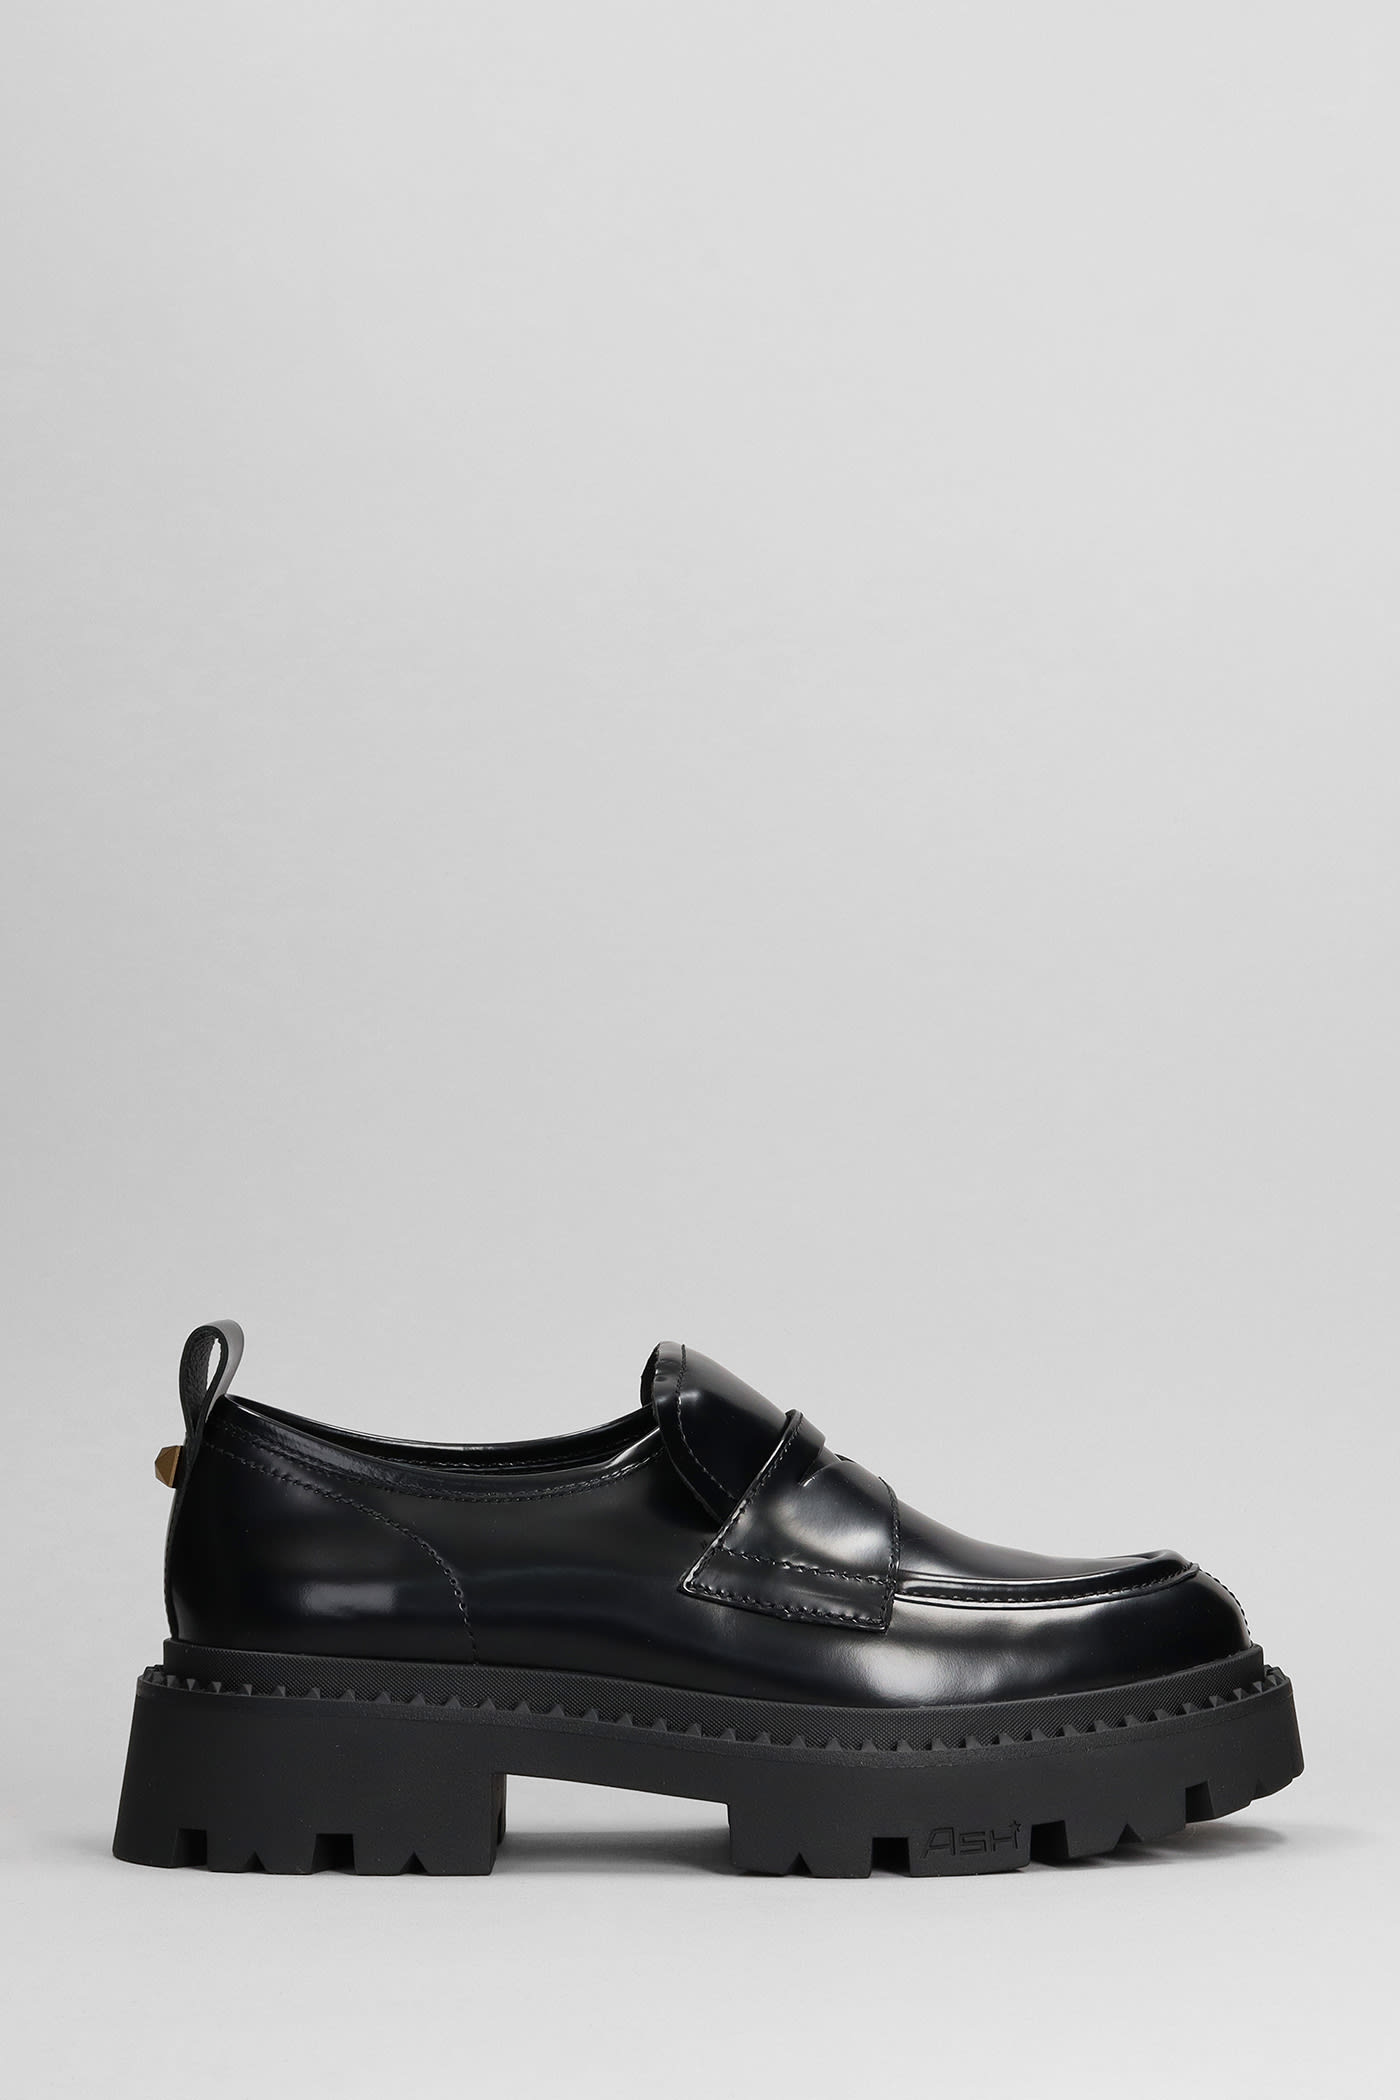 ASH GENIAL LOAFERS IN BLACK LEATHER